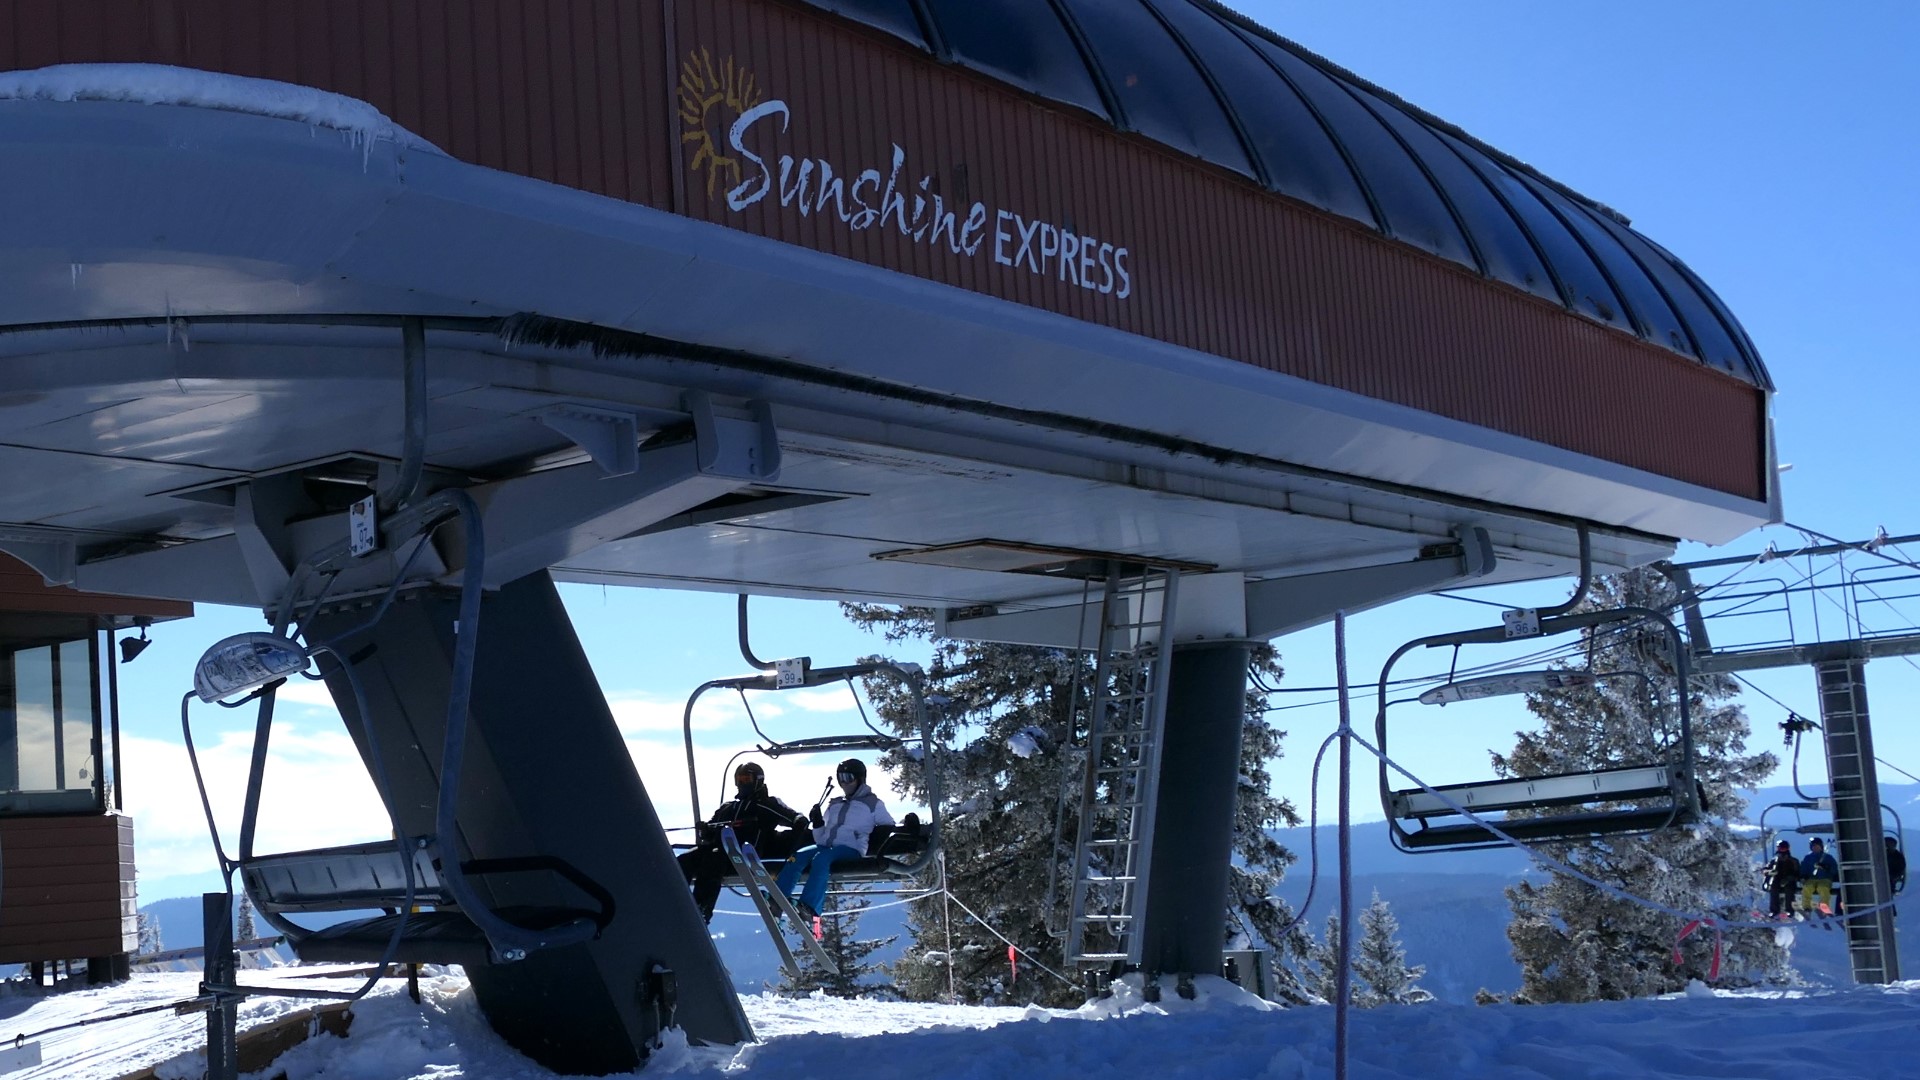 The child fell approximately 20 feet, according to a spokesperson for the Steamboat Ski Resort.